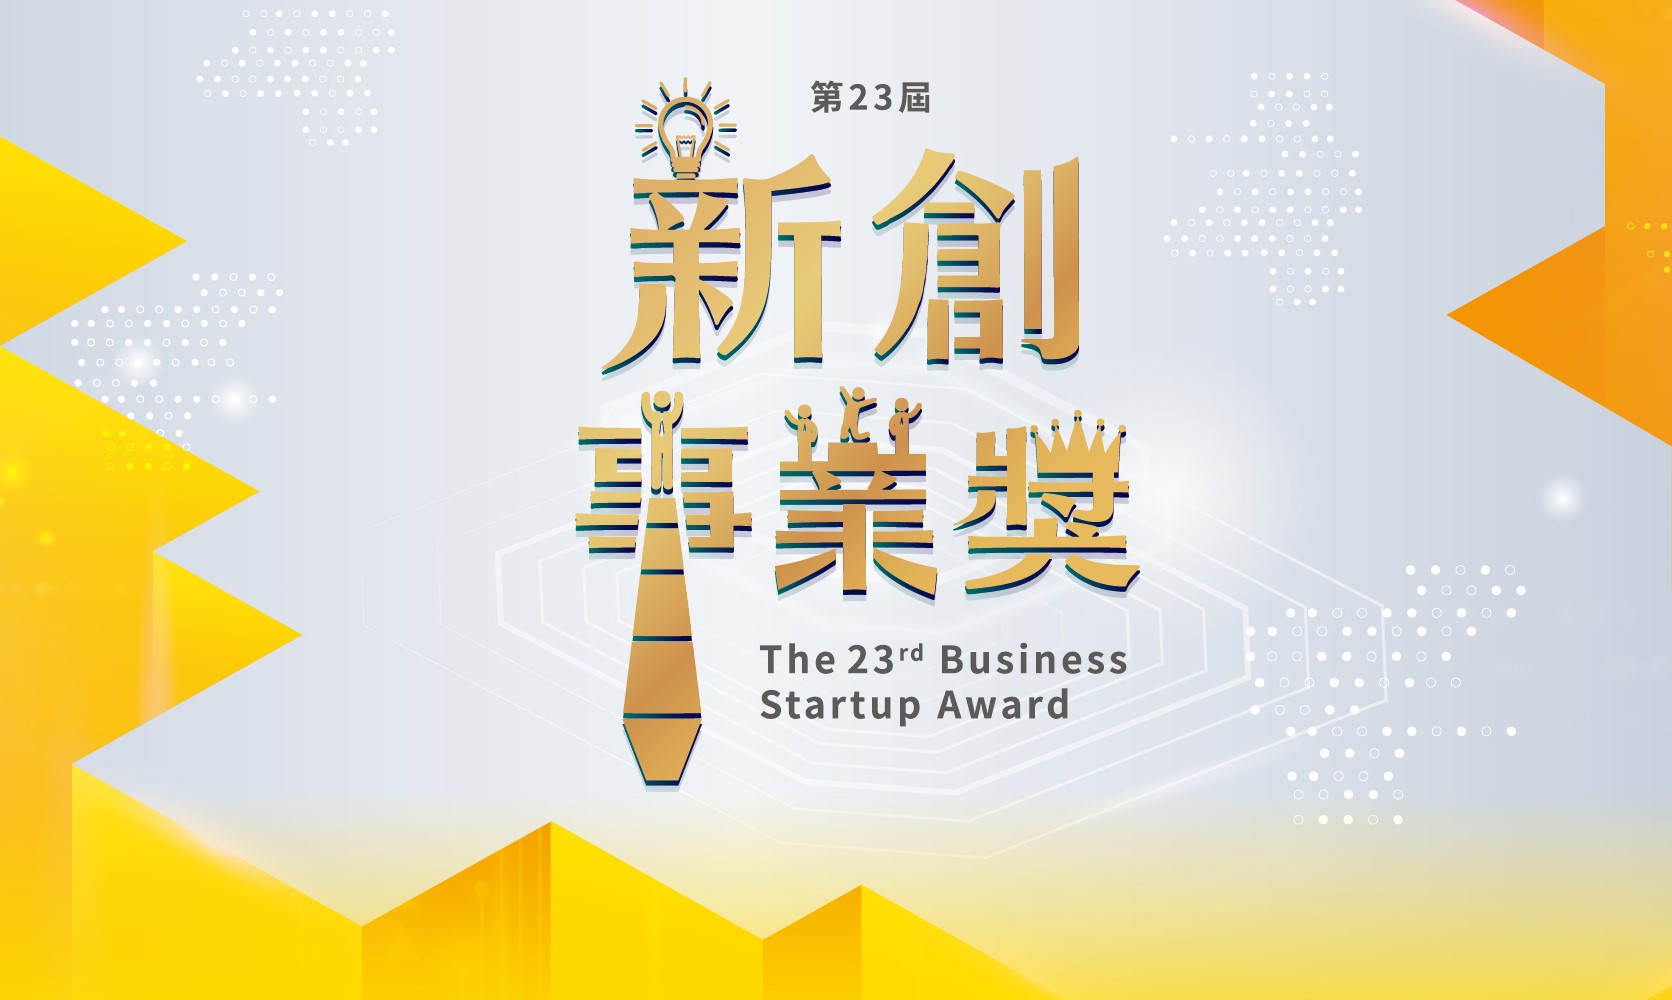 The 23rd Business Startup Award is coming!